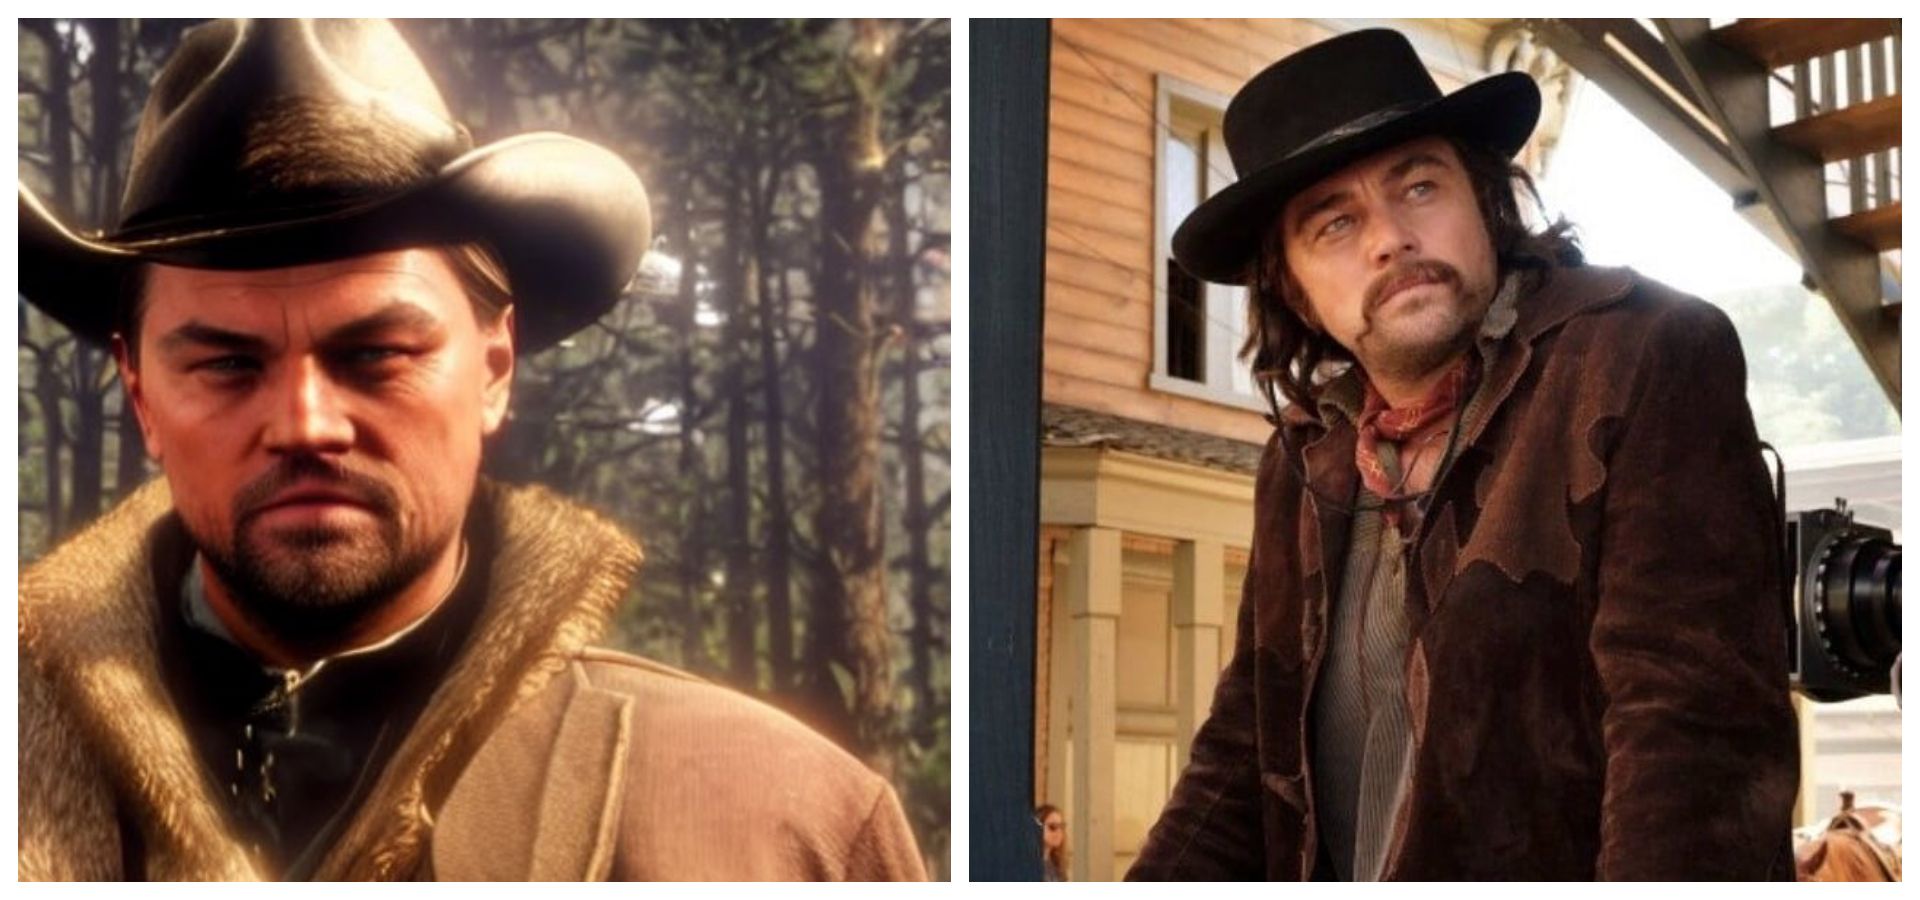 Rockstar Games' latest release had a great story, almost like a movie, so that brings to mind: Who would be cast as Red Dead Redemption 2 characters in a movie?